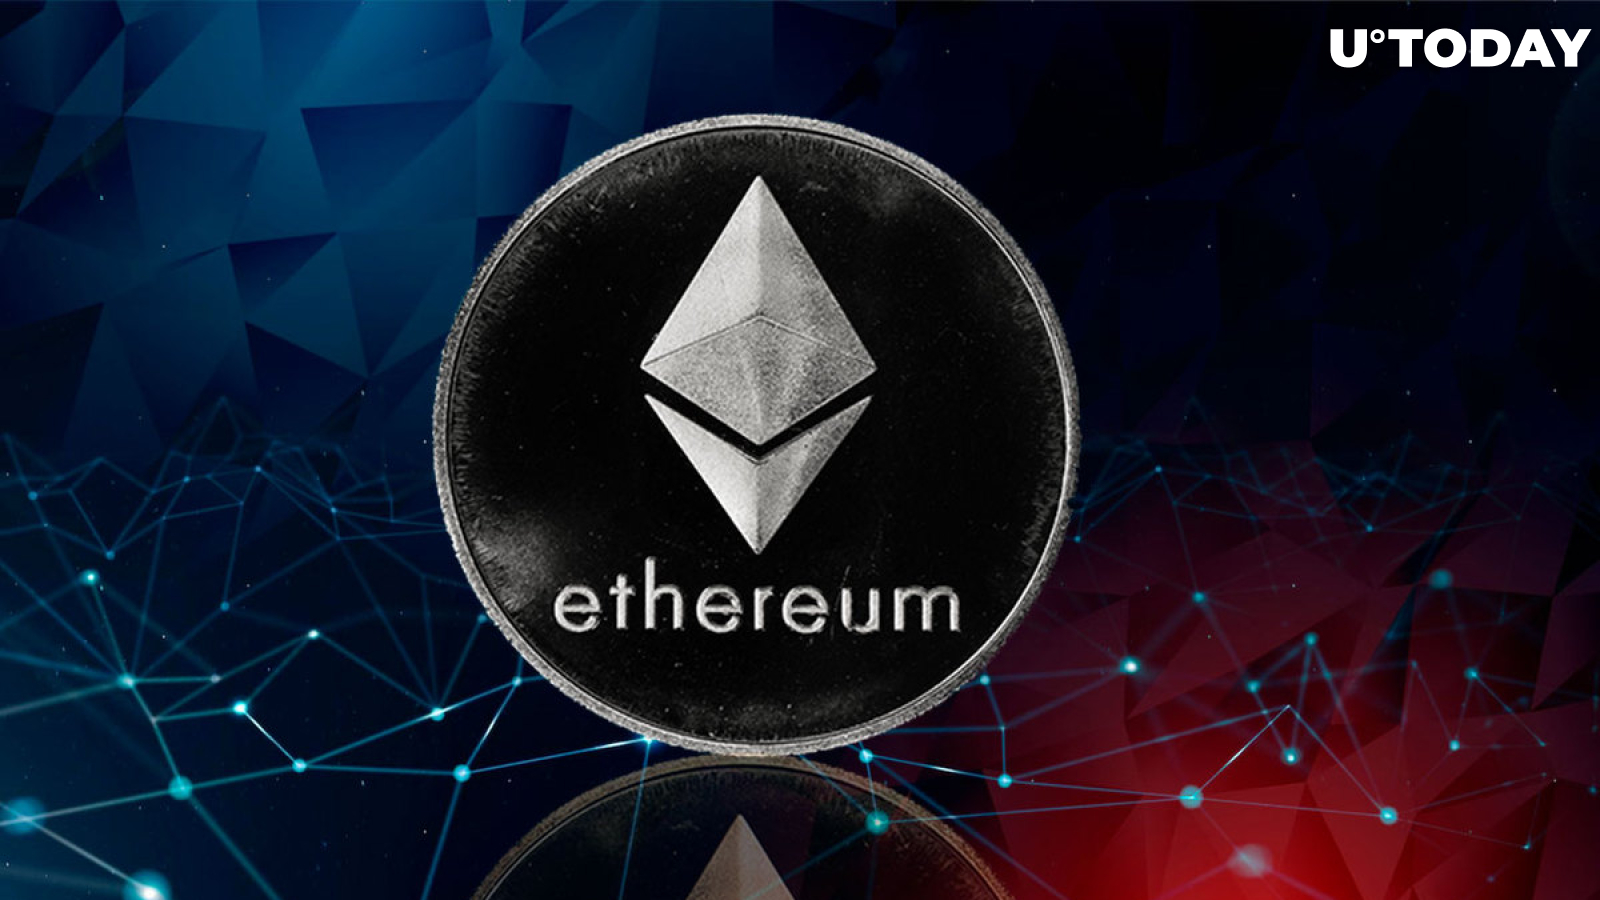 After Ethereum's Merge, Arthur Hayes Says This Is The Only Chart That Matters